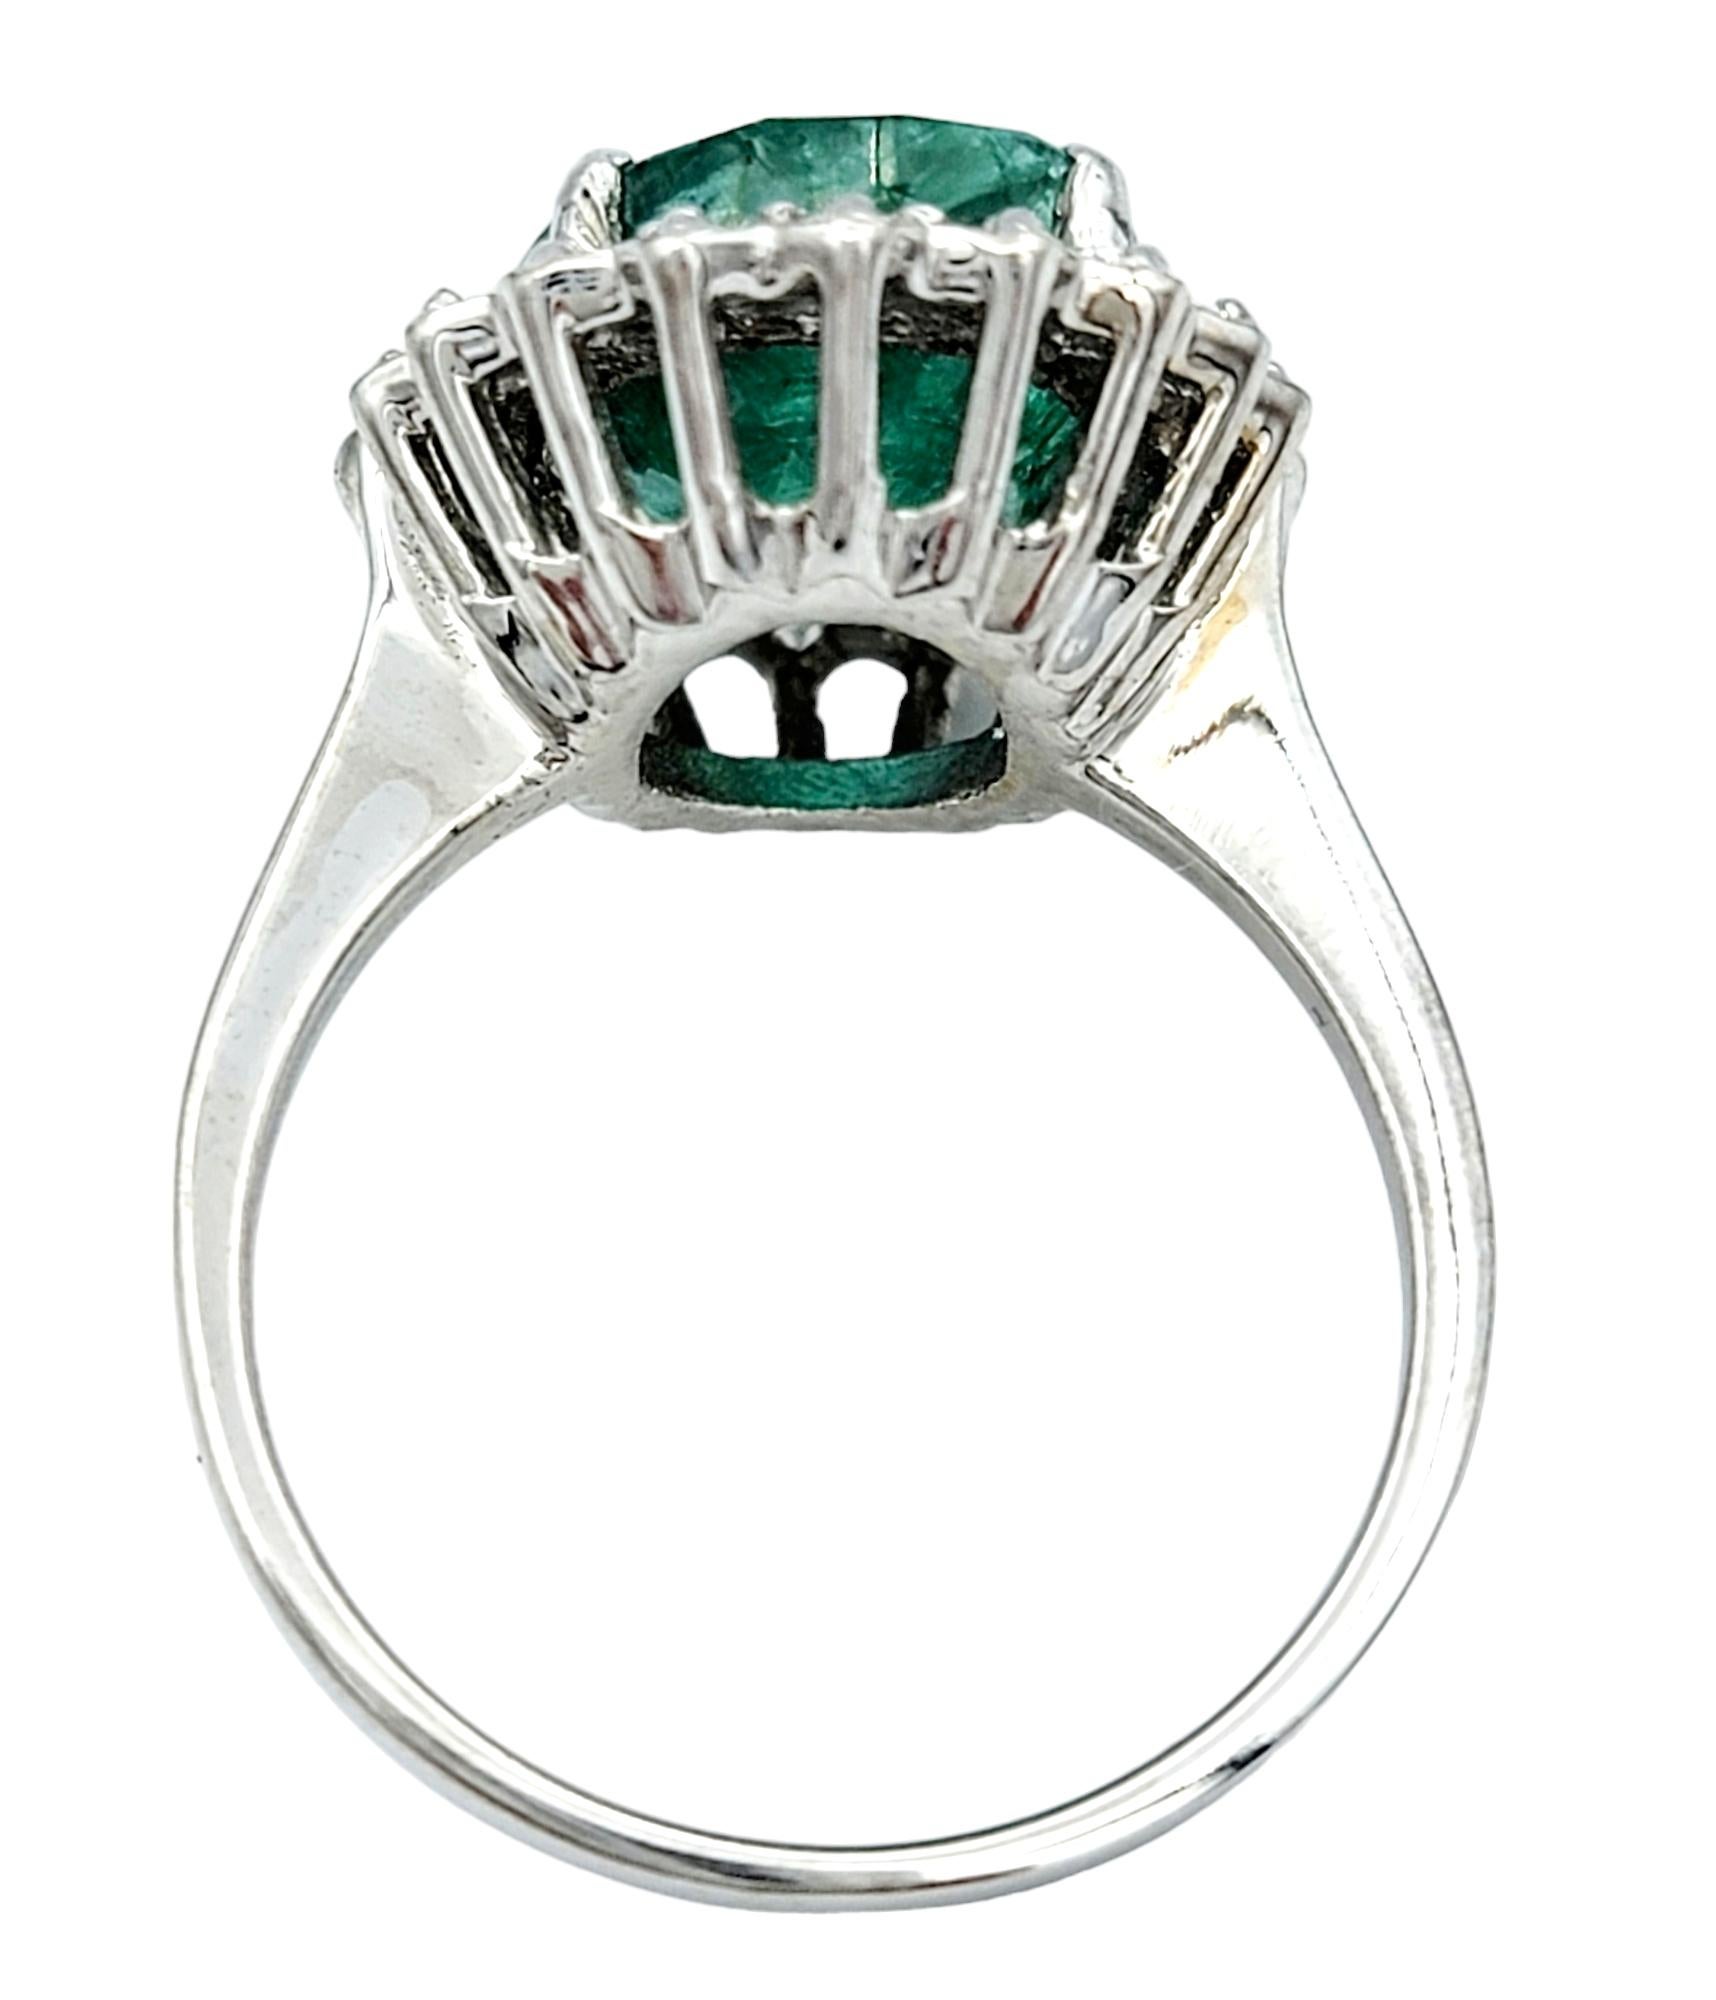 Women's 4.98 Carat Oval Cut Emerald and Diamond Halo Ring Set in 18 Karat White Gold For Sale